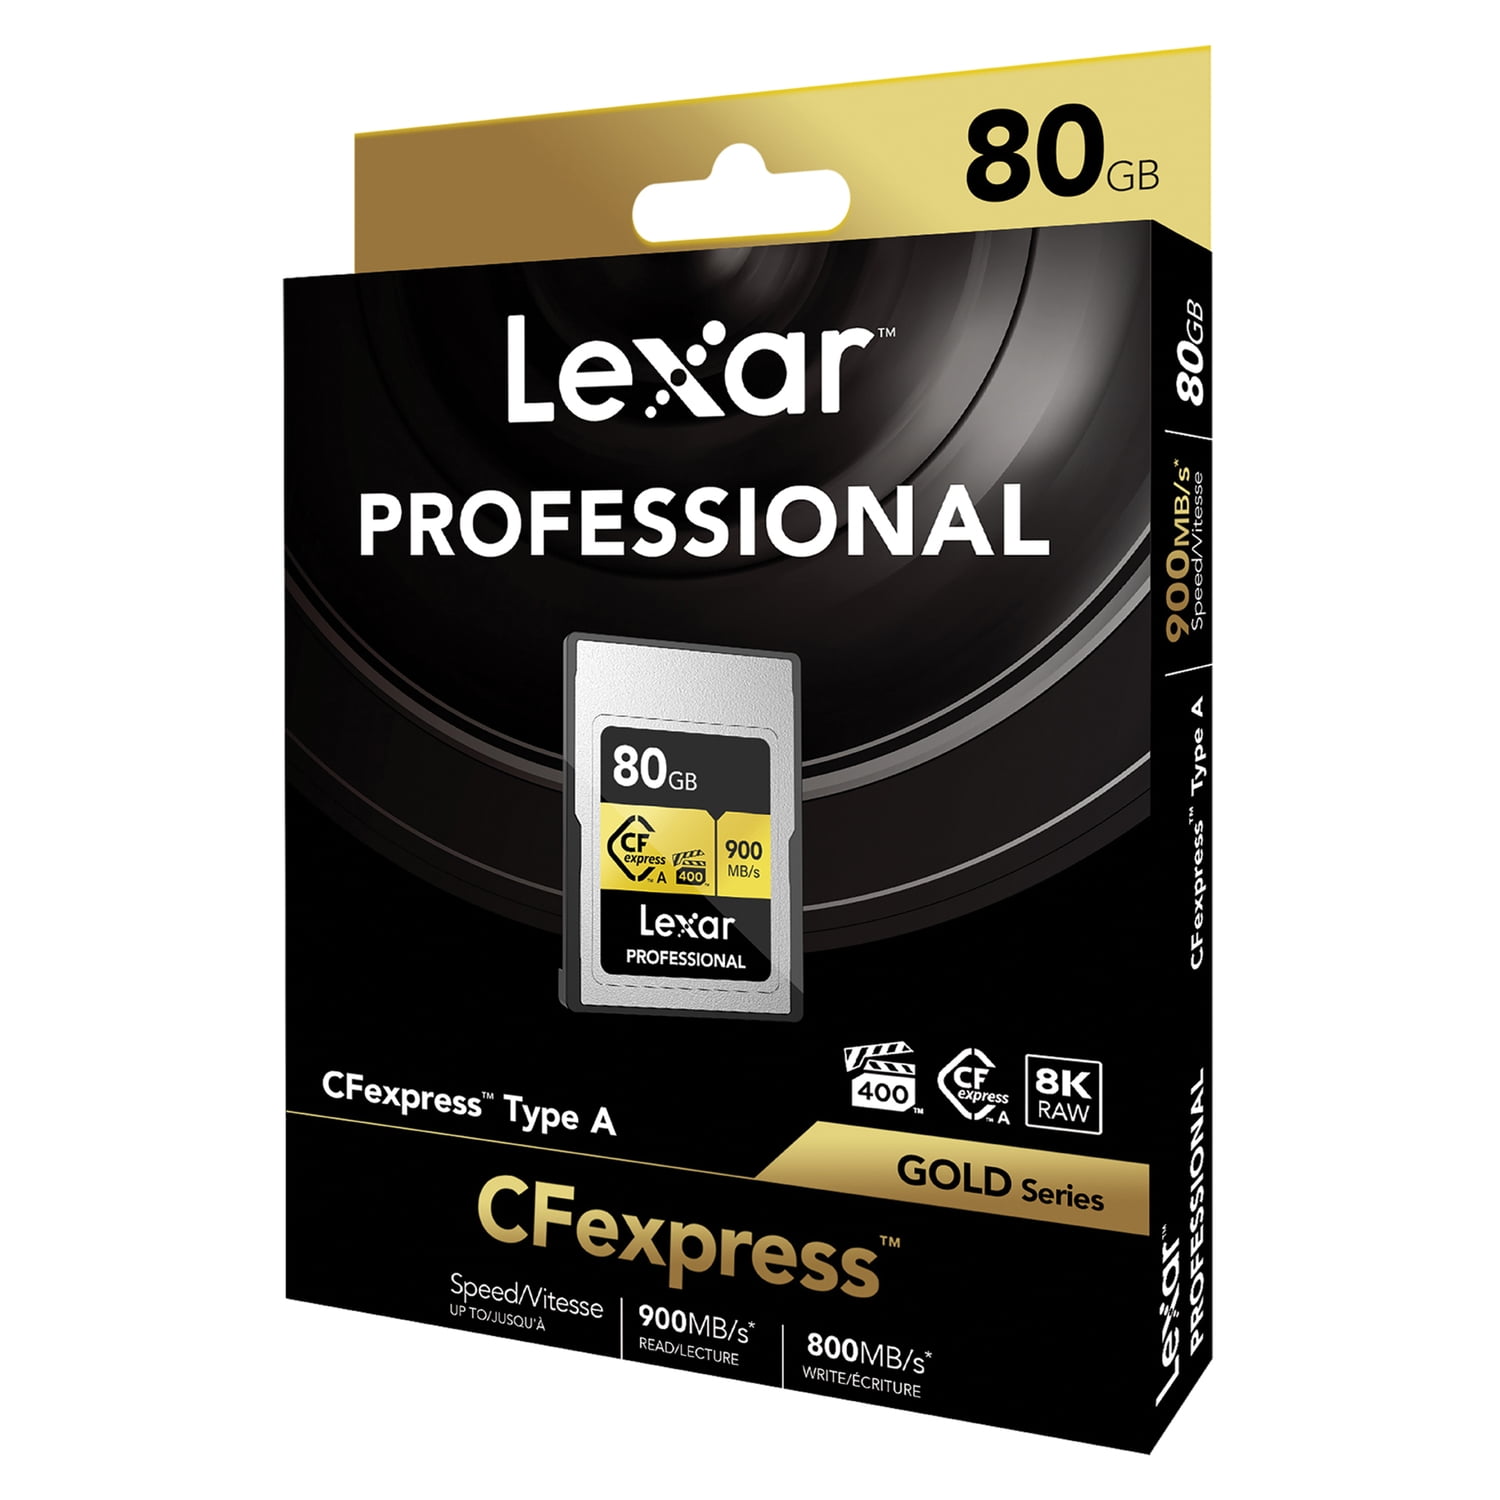 Lexar Professional Gold 2TB CFExpress Type B Memory Card Review